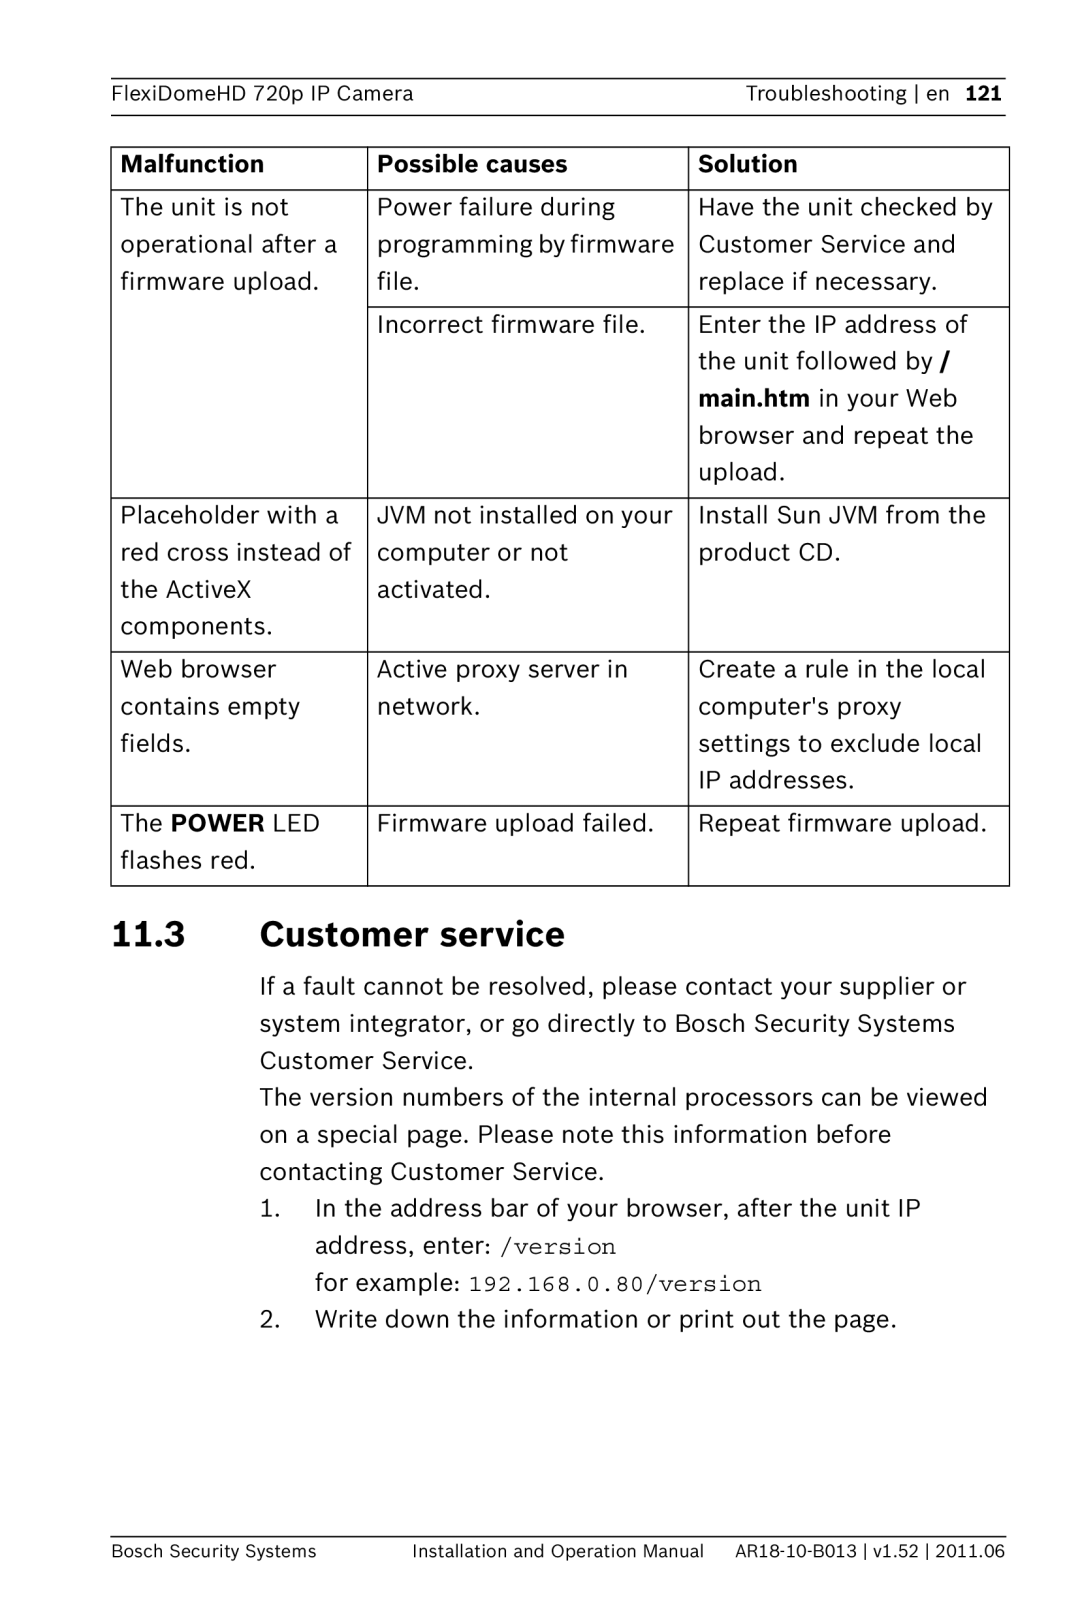 Bosch Appliances NDN-921 operation manual 11.3Customer service, Malfunction, Possible causes, Solution 